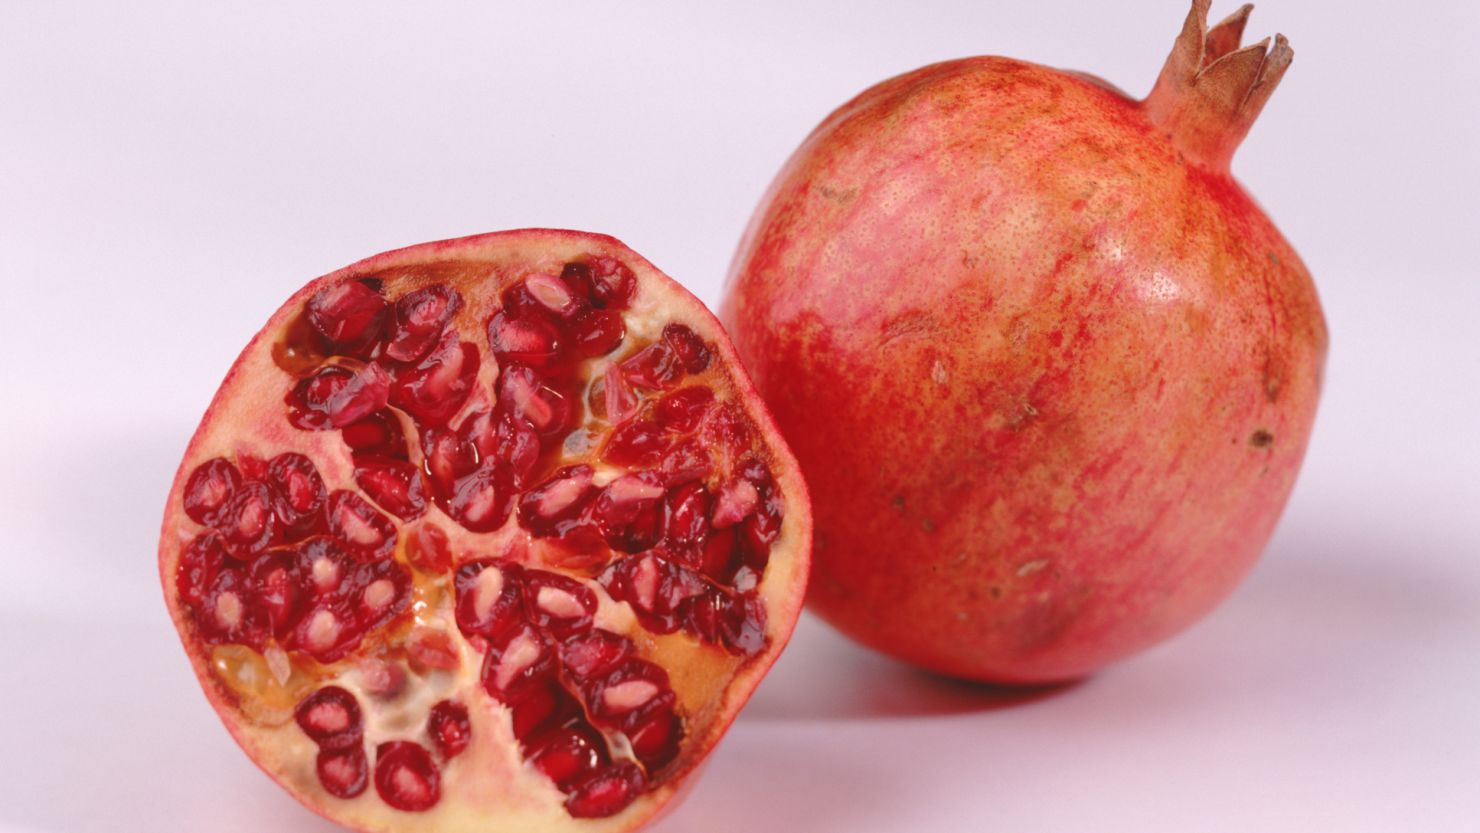 POM Wonderful had great success in making the relatively unknown pomegranate a household staple.